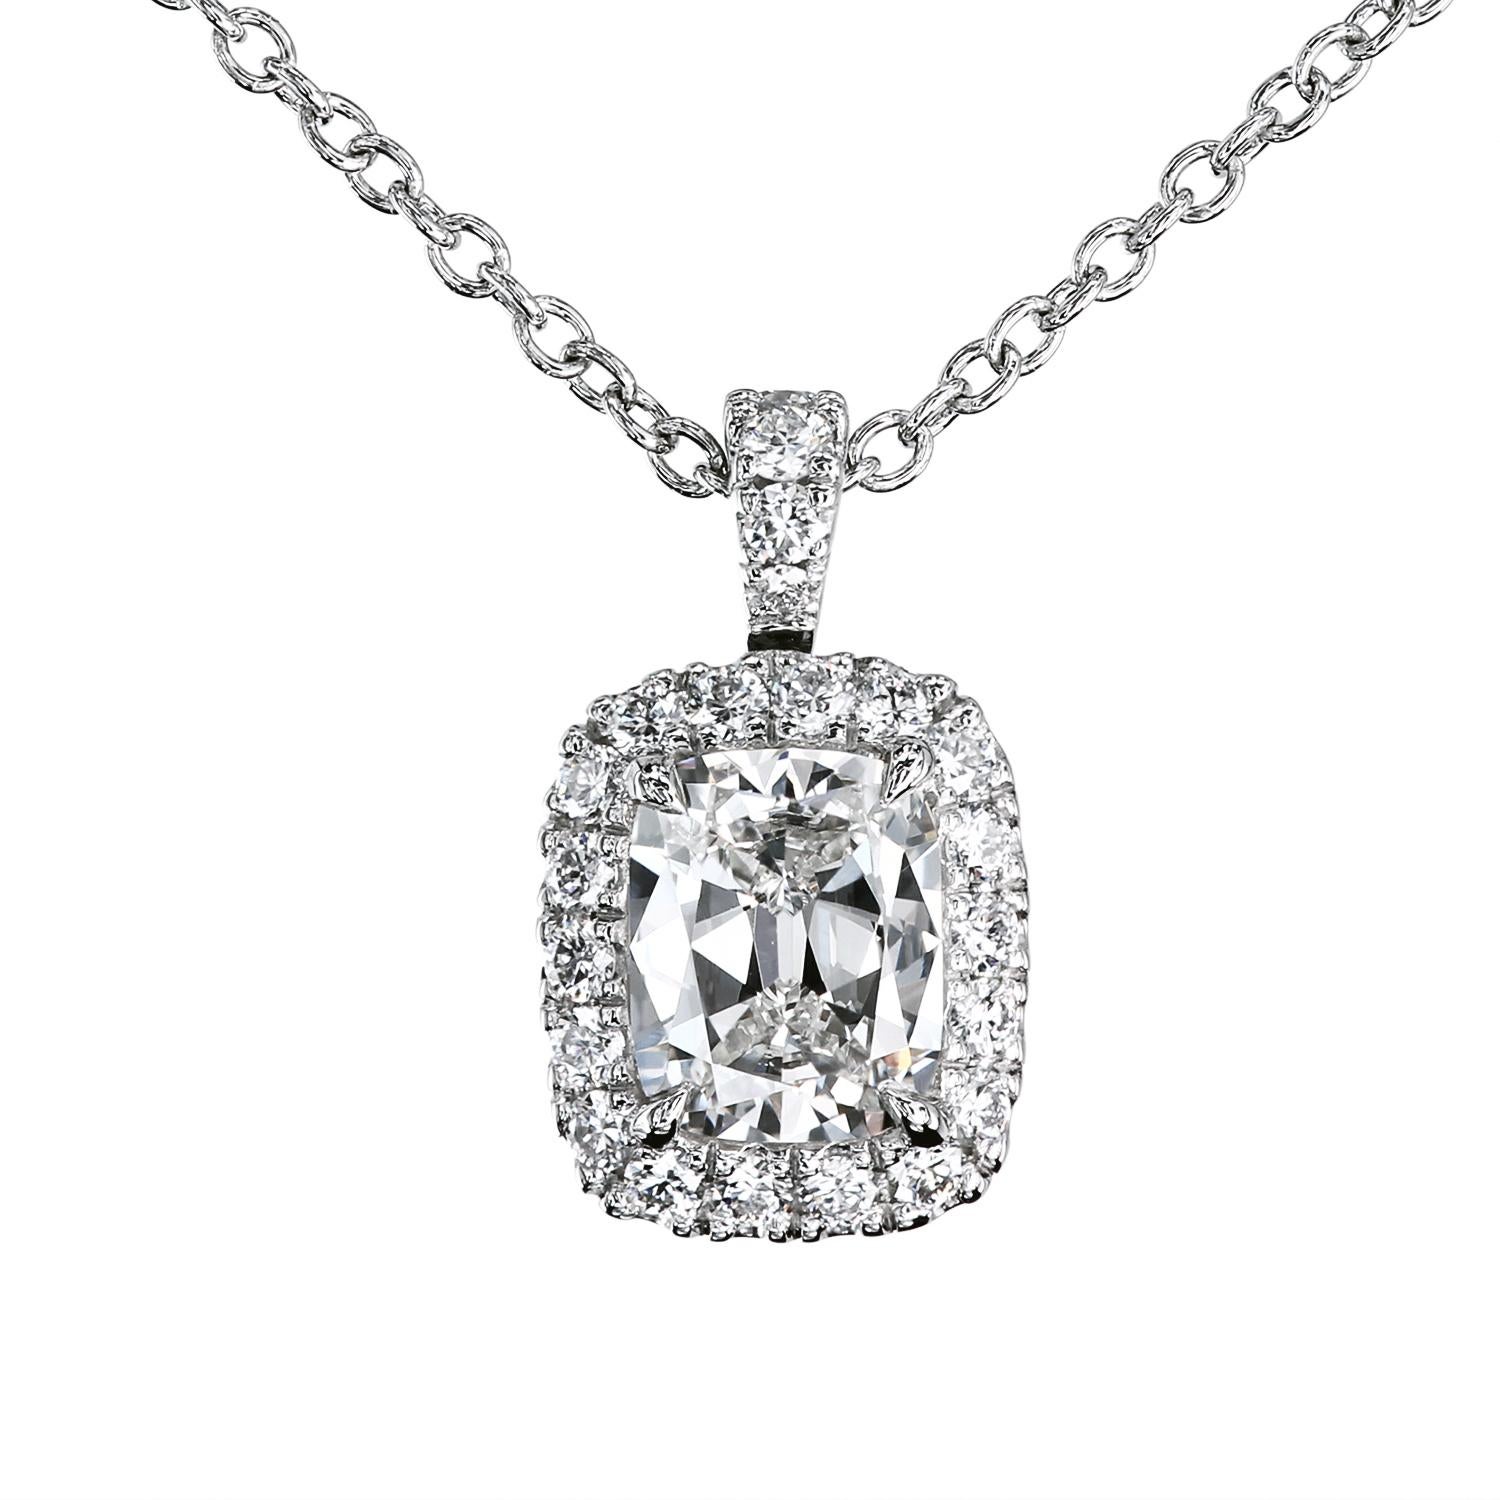 GIA-certified 0.70 Carat D/SI1 Diamond Antique cushion diamond surrounded by micro pave diamonds in a delicate bench-made pendant by Leon Mege.
GIA certificate #2165647209
The pendant features a hinged bail that allows free oscillating movement